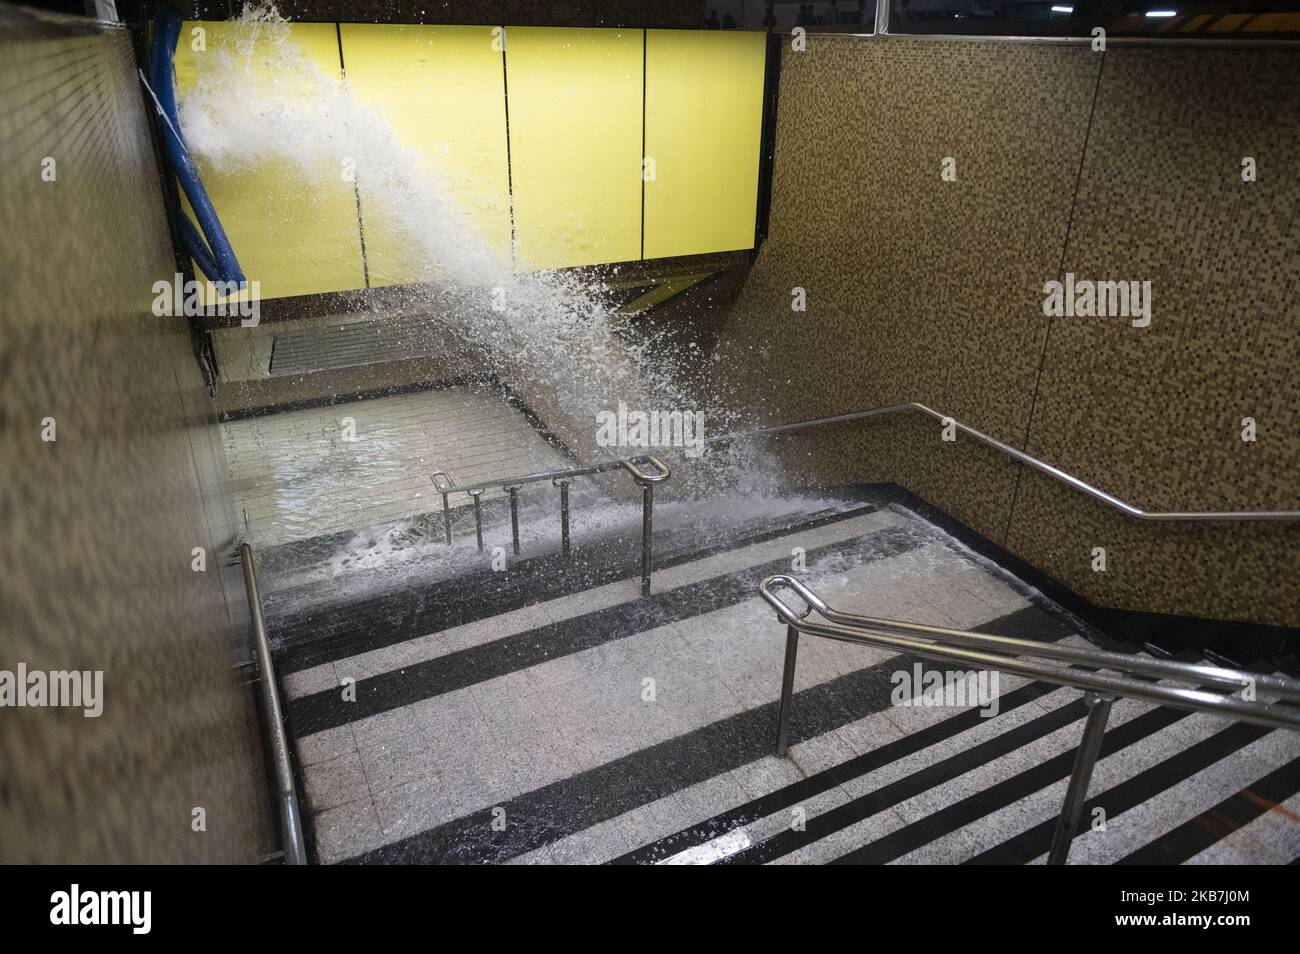 Water are seen during into an MTR station in Hong Kong on October 4, 2019, Hong Kong invoked emergency powers for the first time in more than half a century to ban face masks for protesters after months of unrest, prompting demonstrators to occupy downtown streets and forcing the metro operator to shut down all services late Friday. (Photo by Vernon Yuen/NurPhoto) Stock Photo